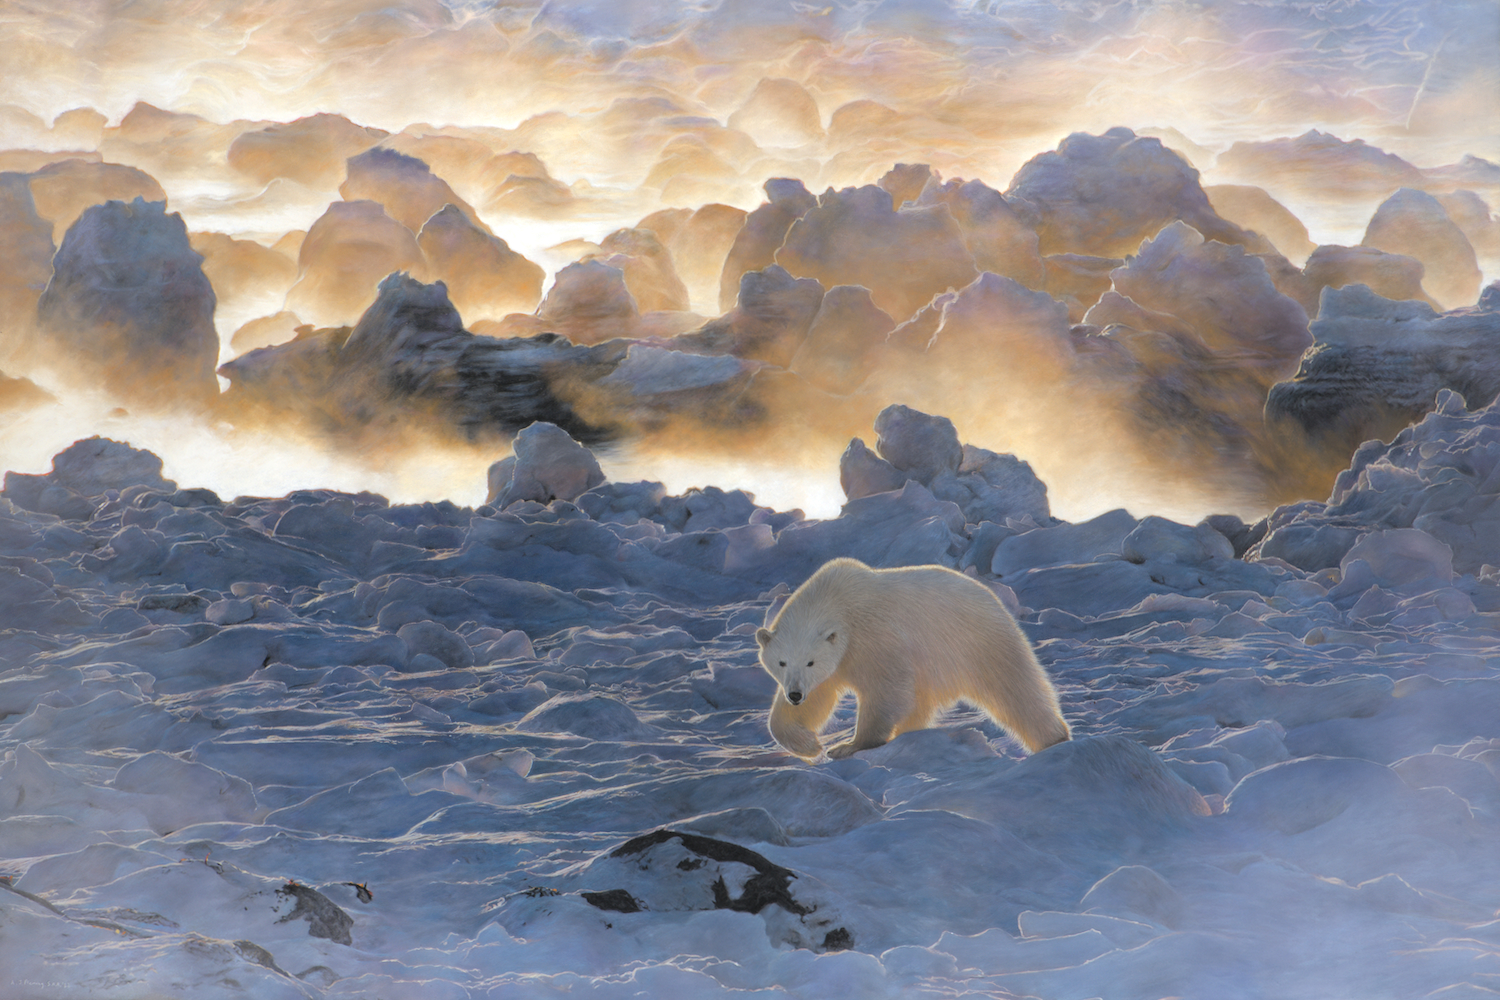 Pastel and colour pencil drawing of a polar bear in its home environment